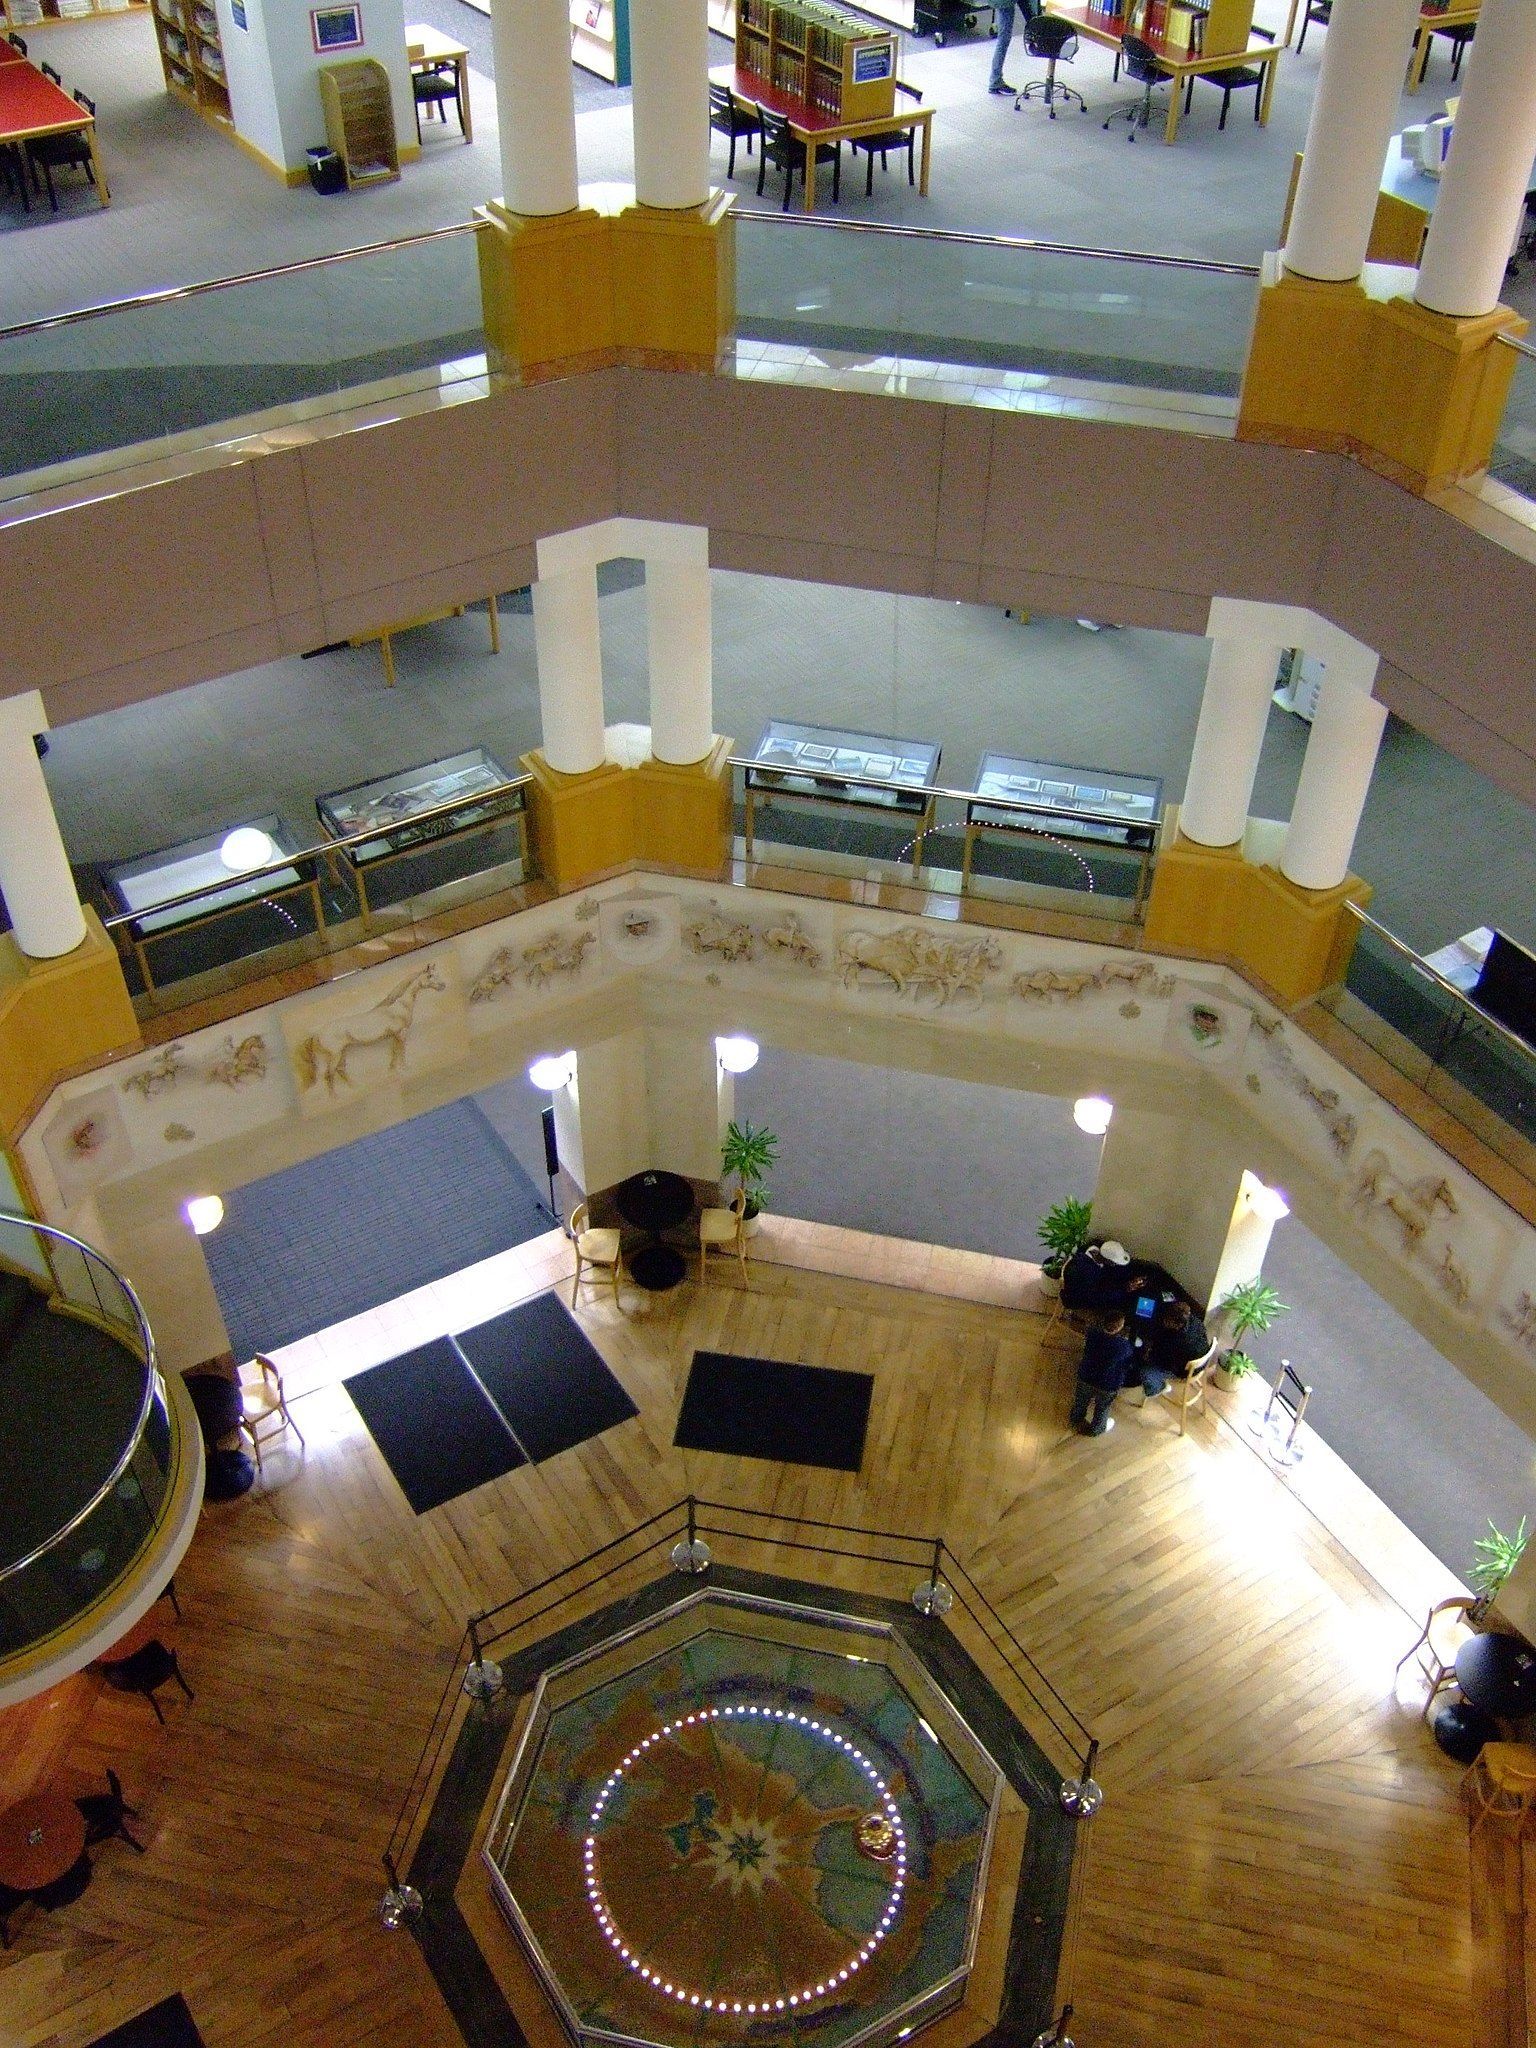 World's Largest Ceiling Clock: world record in Lexington, Kentucky